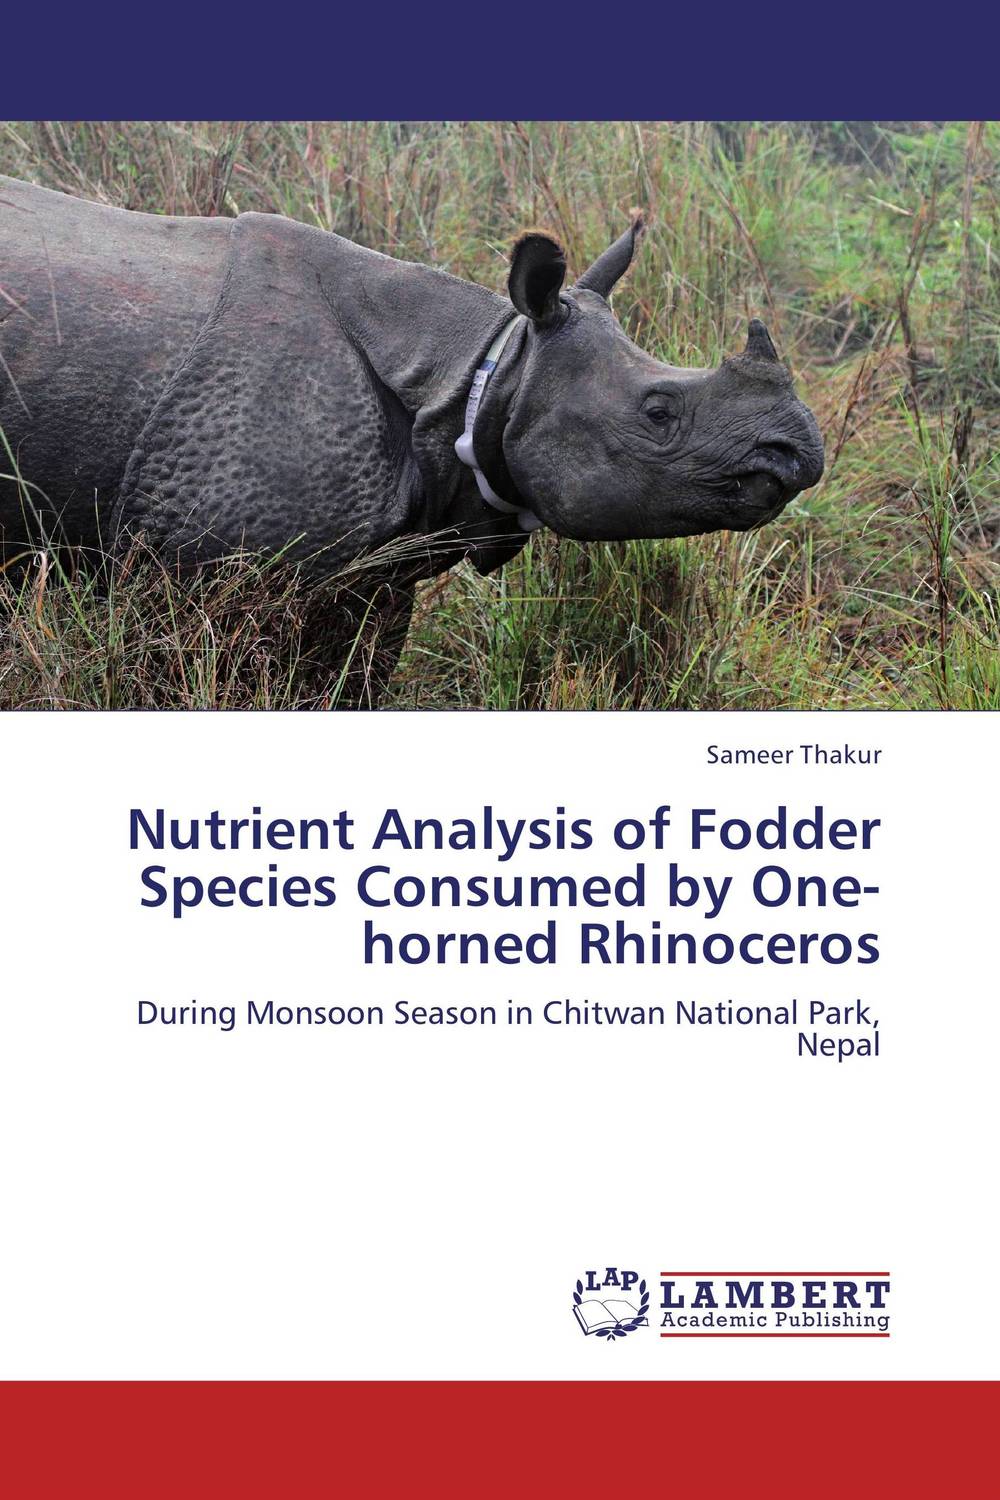 Nutrient Analysis of Fodder Species Consumed by One-horned Rhinoceros